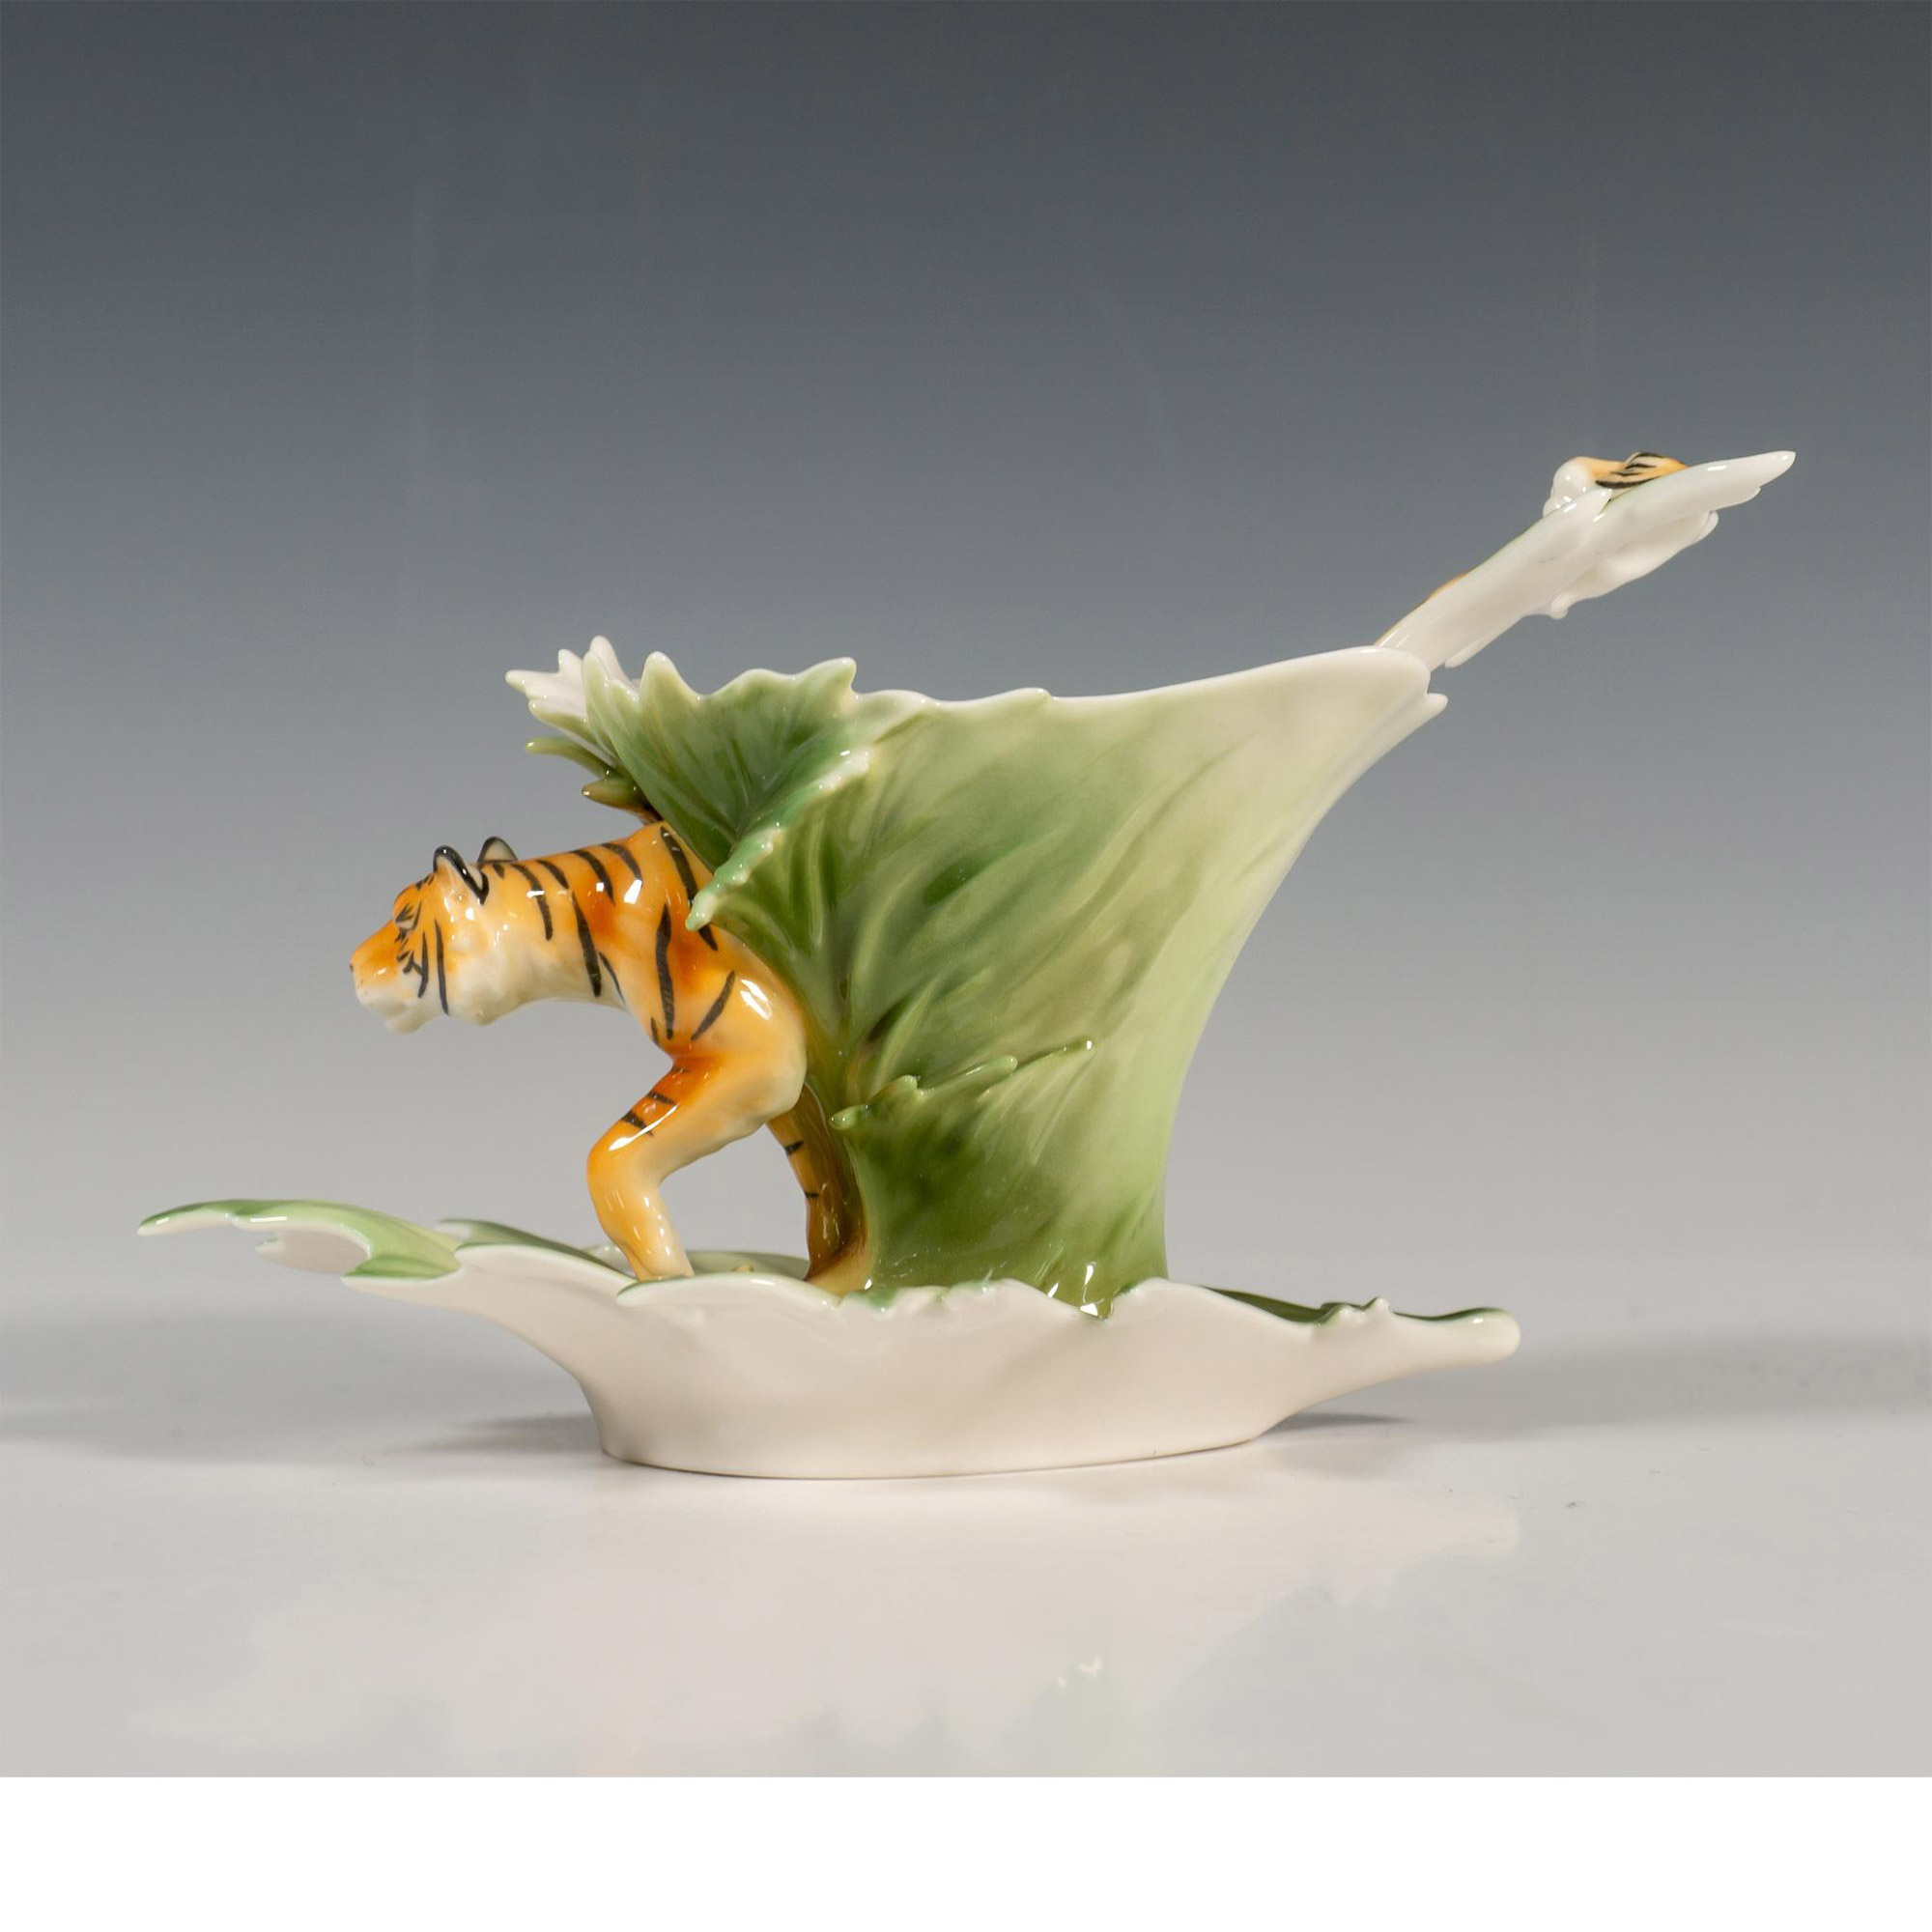 3pc Franz Collection Porcelain Tea Cup And Saucer, FZ00449 - Image 3 of 5